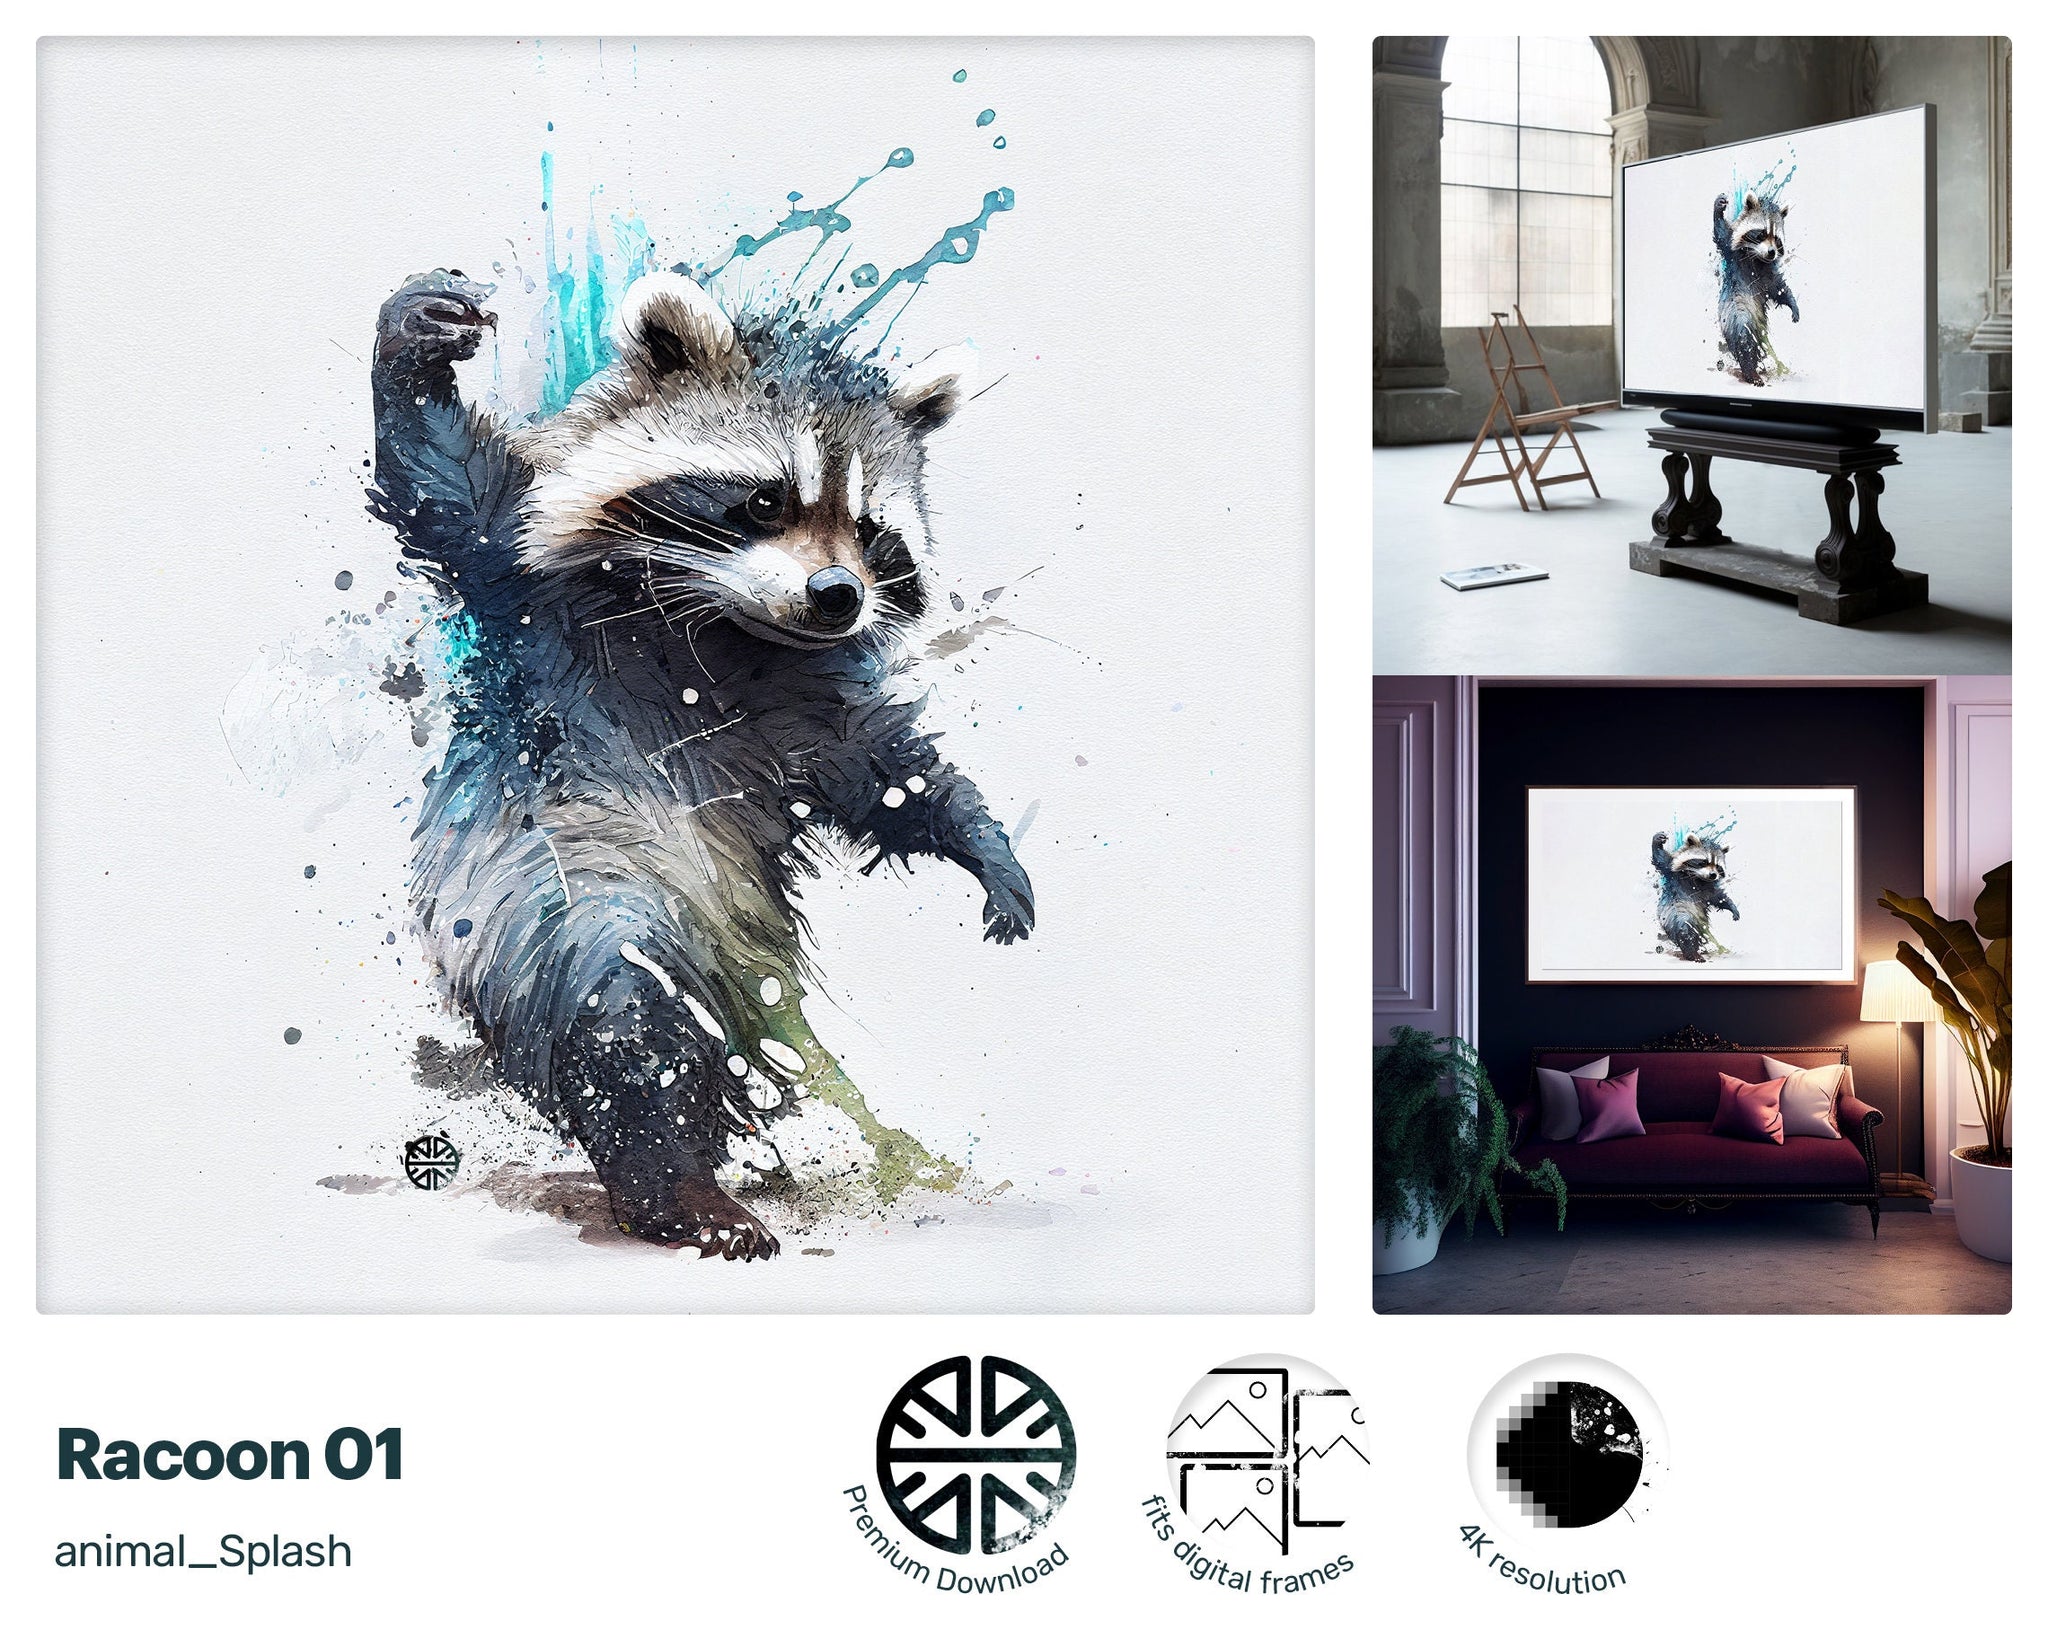 Samsung Art TV, Racoon Dab, premium download, drops and splashes, friendly wallpaper, art for kids